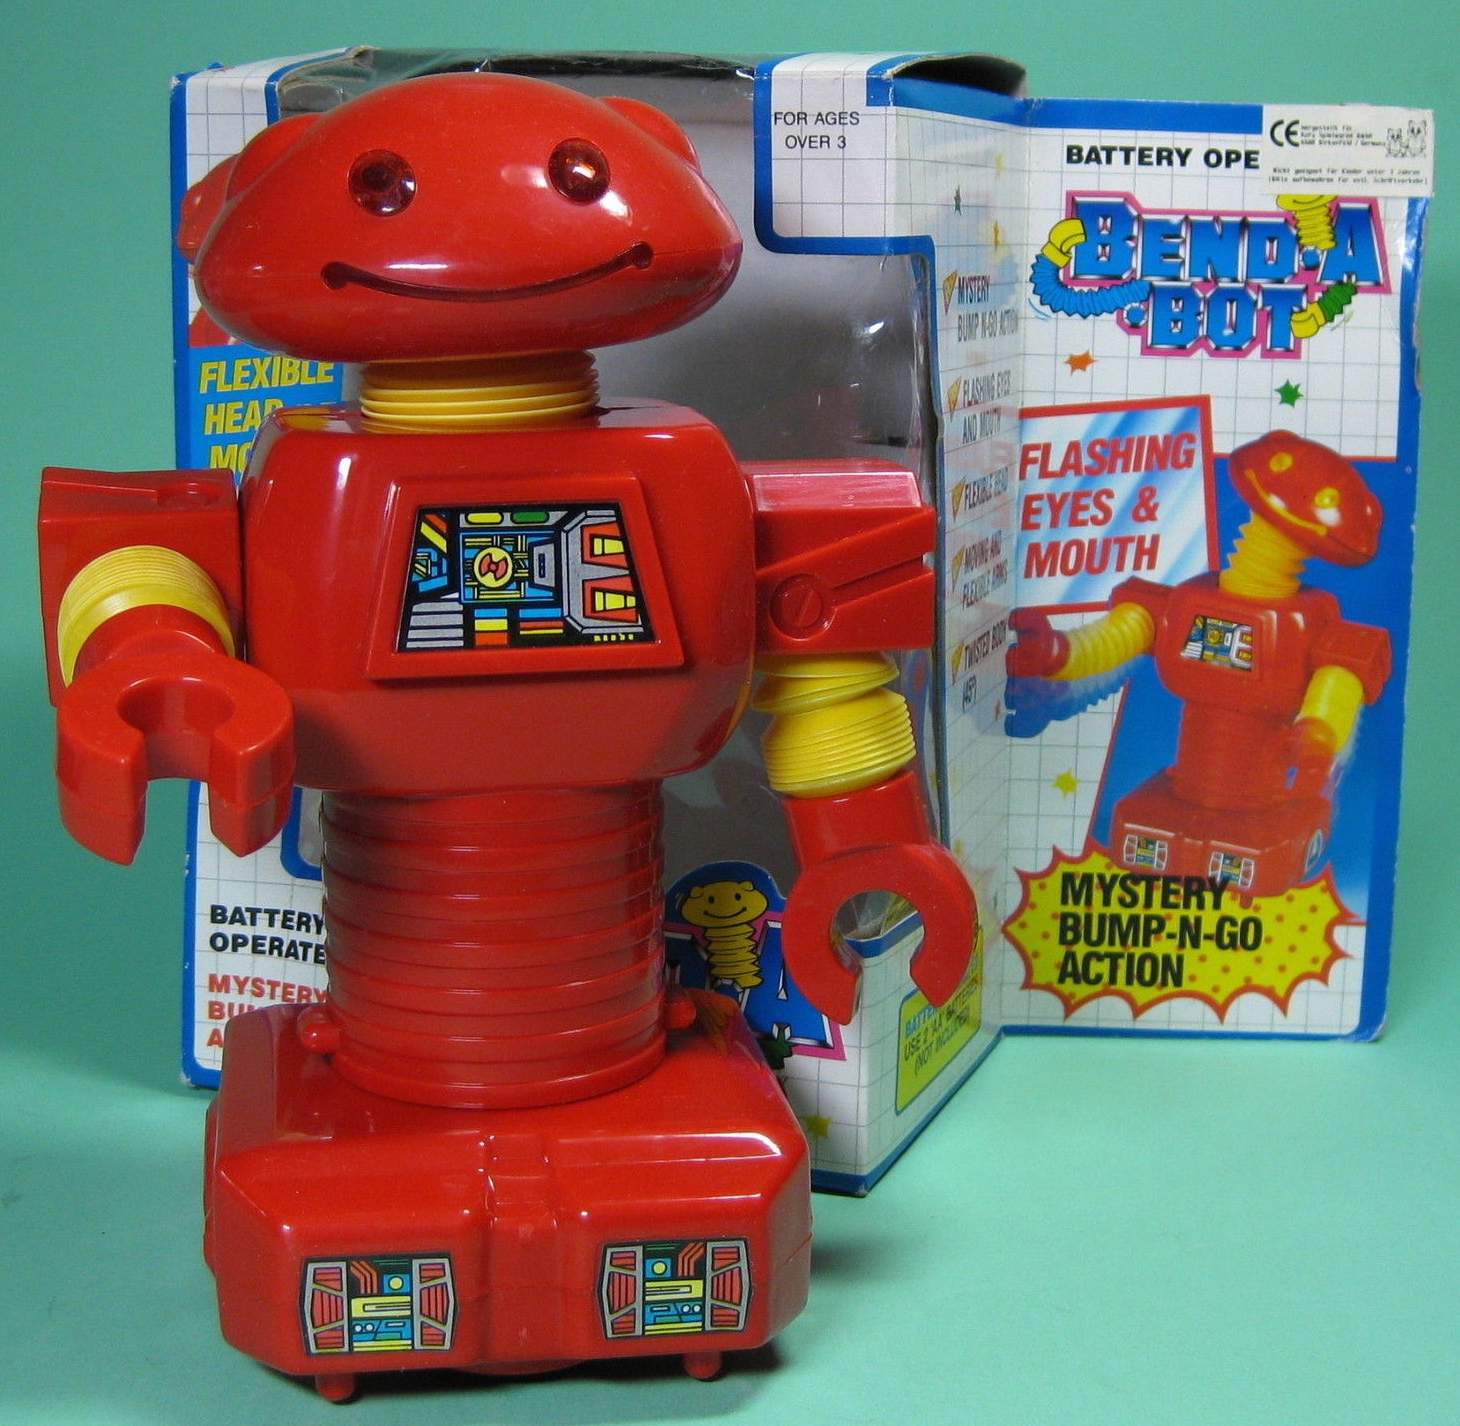 Vintage Battery Operated BEND-A-BOT ROBOT FIRE-BOT version MIB 1990's 